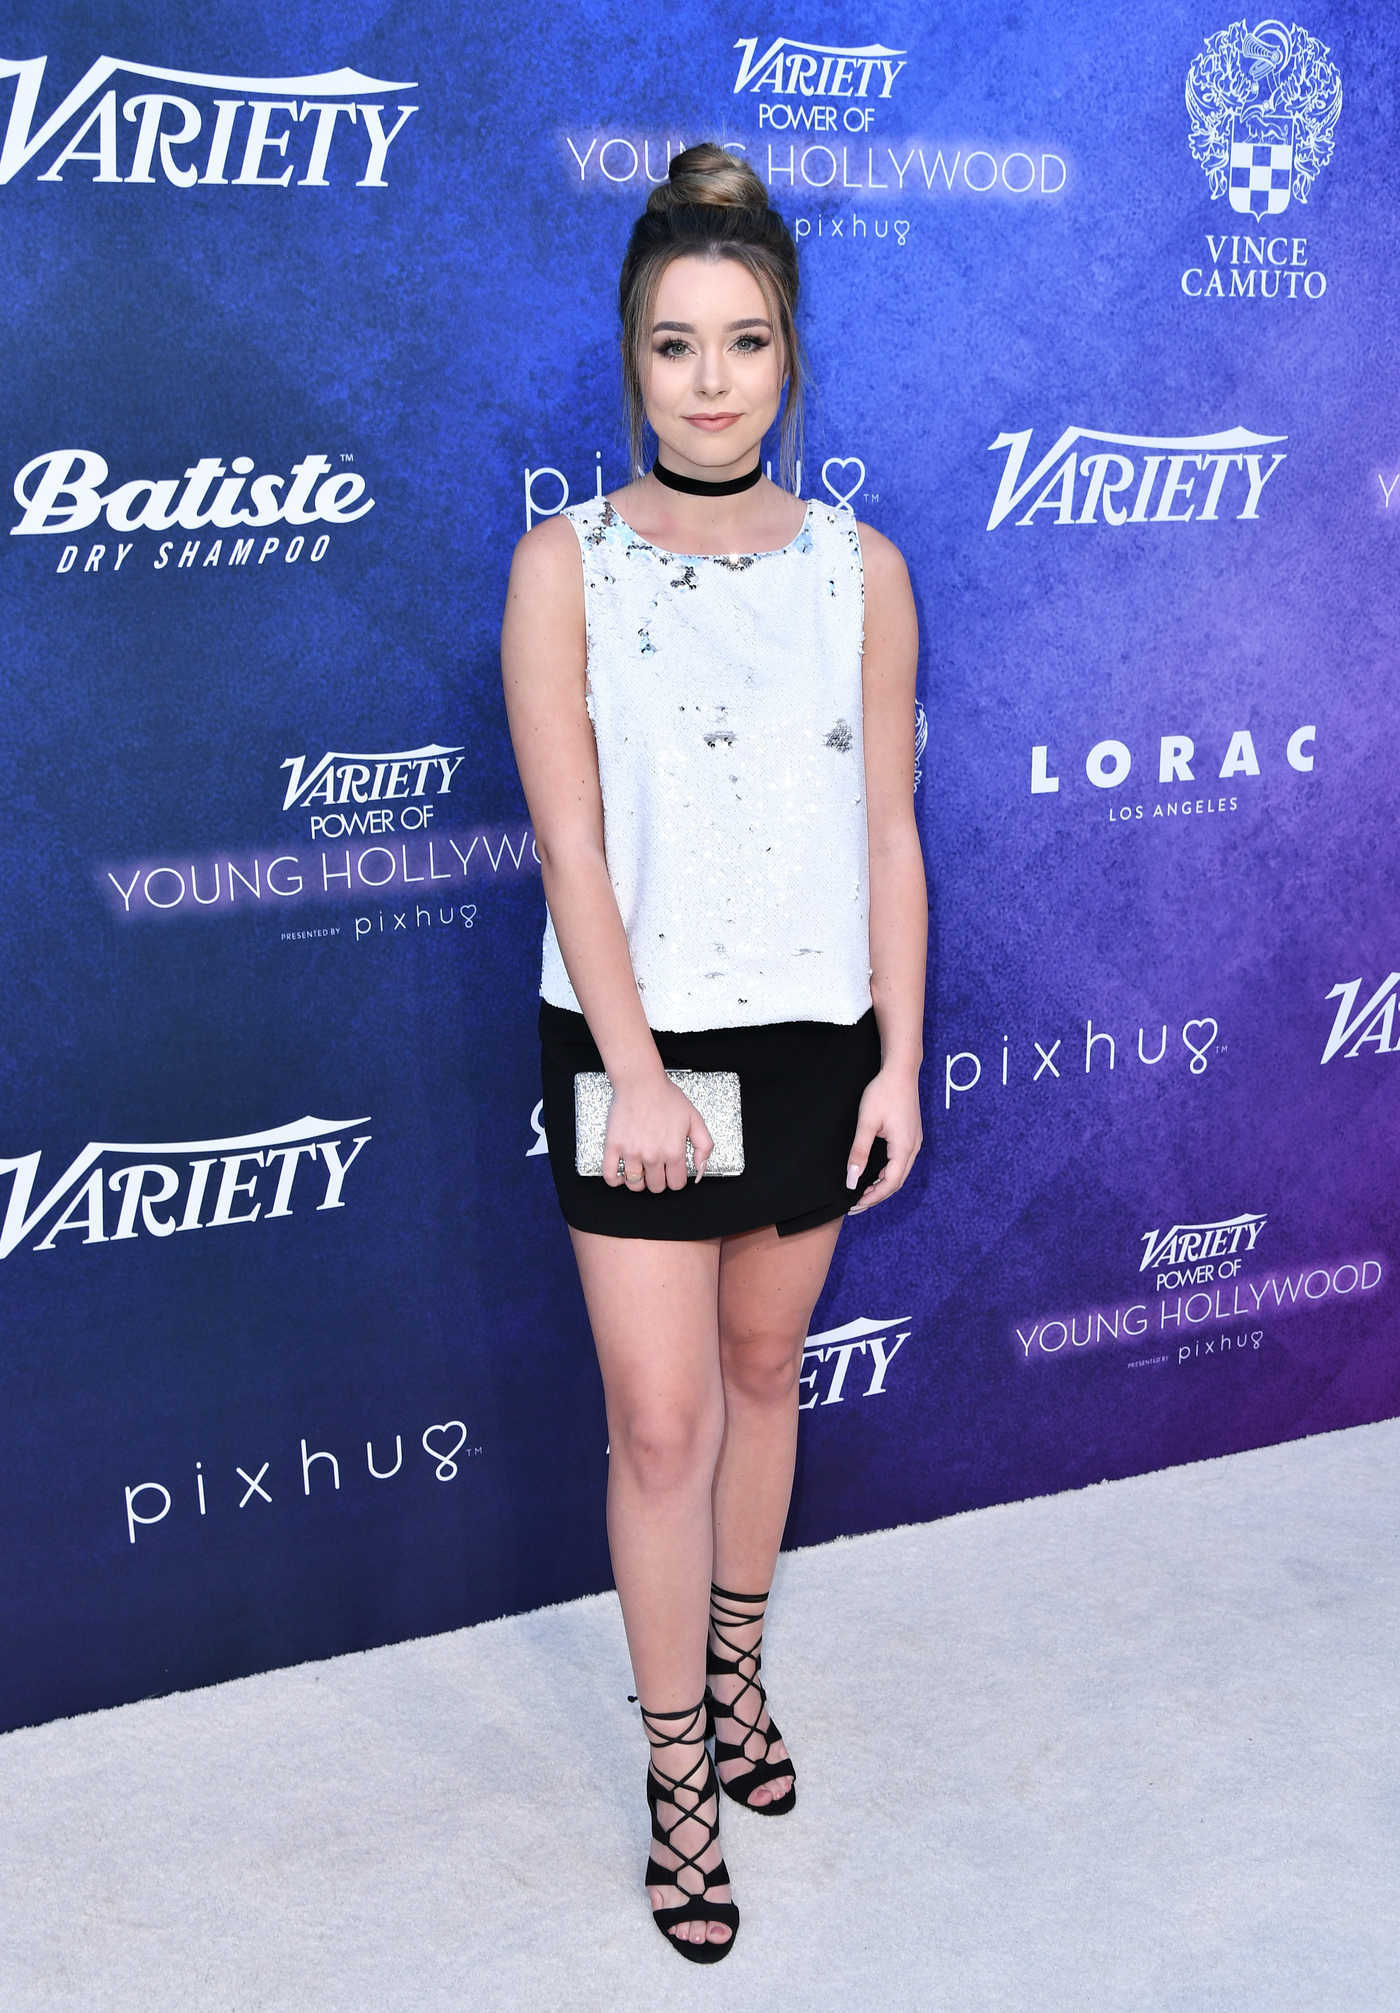 Sierra Furtado at Variety's Power of Young Hollywood Presented by Pixhug in Los Angeles 08/16/2016